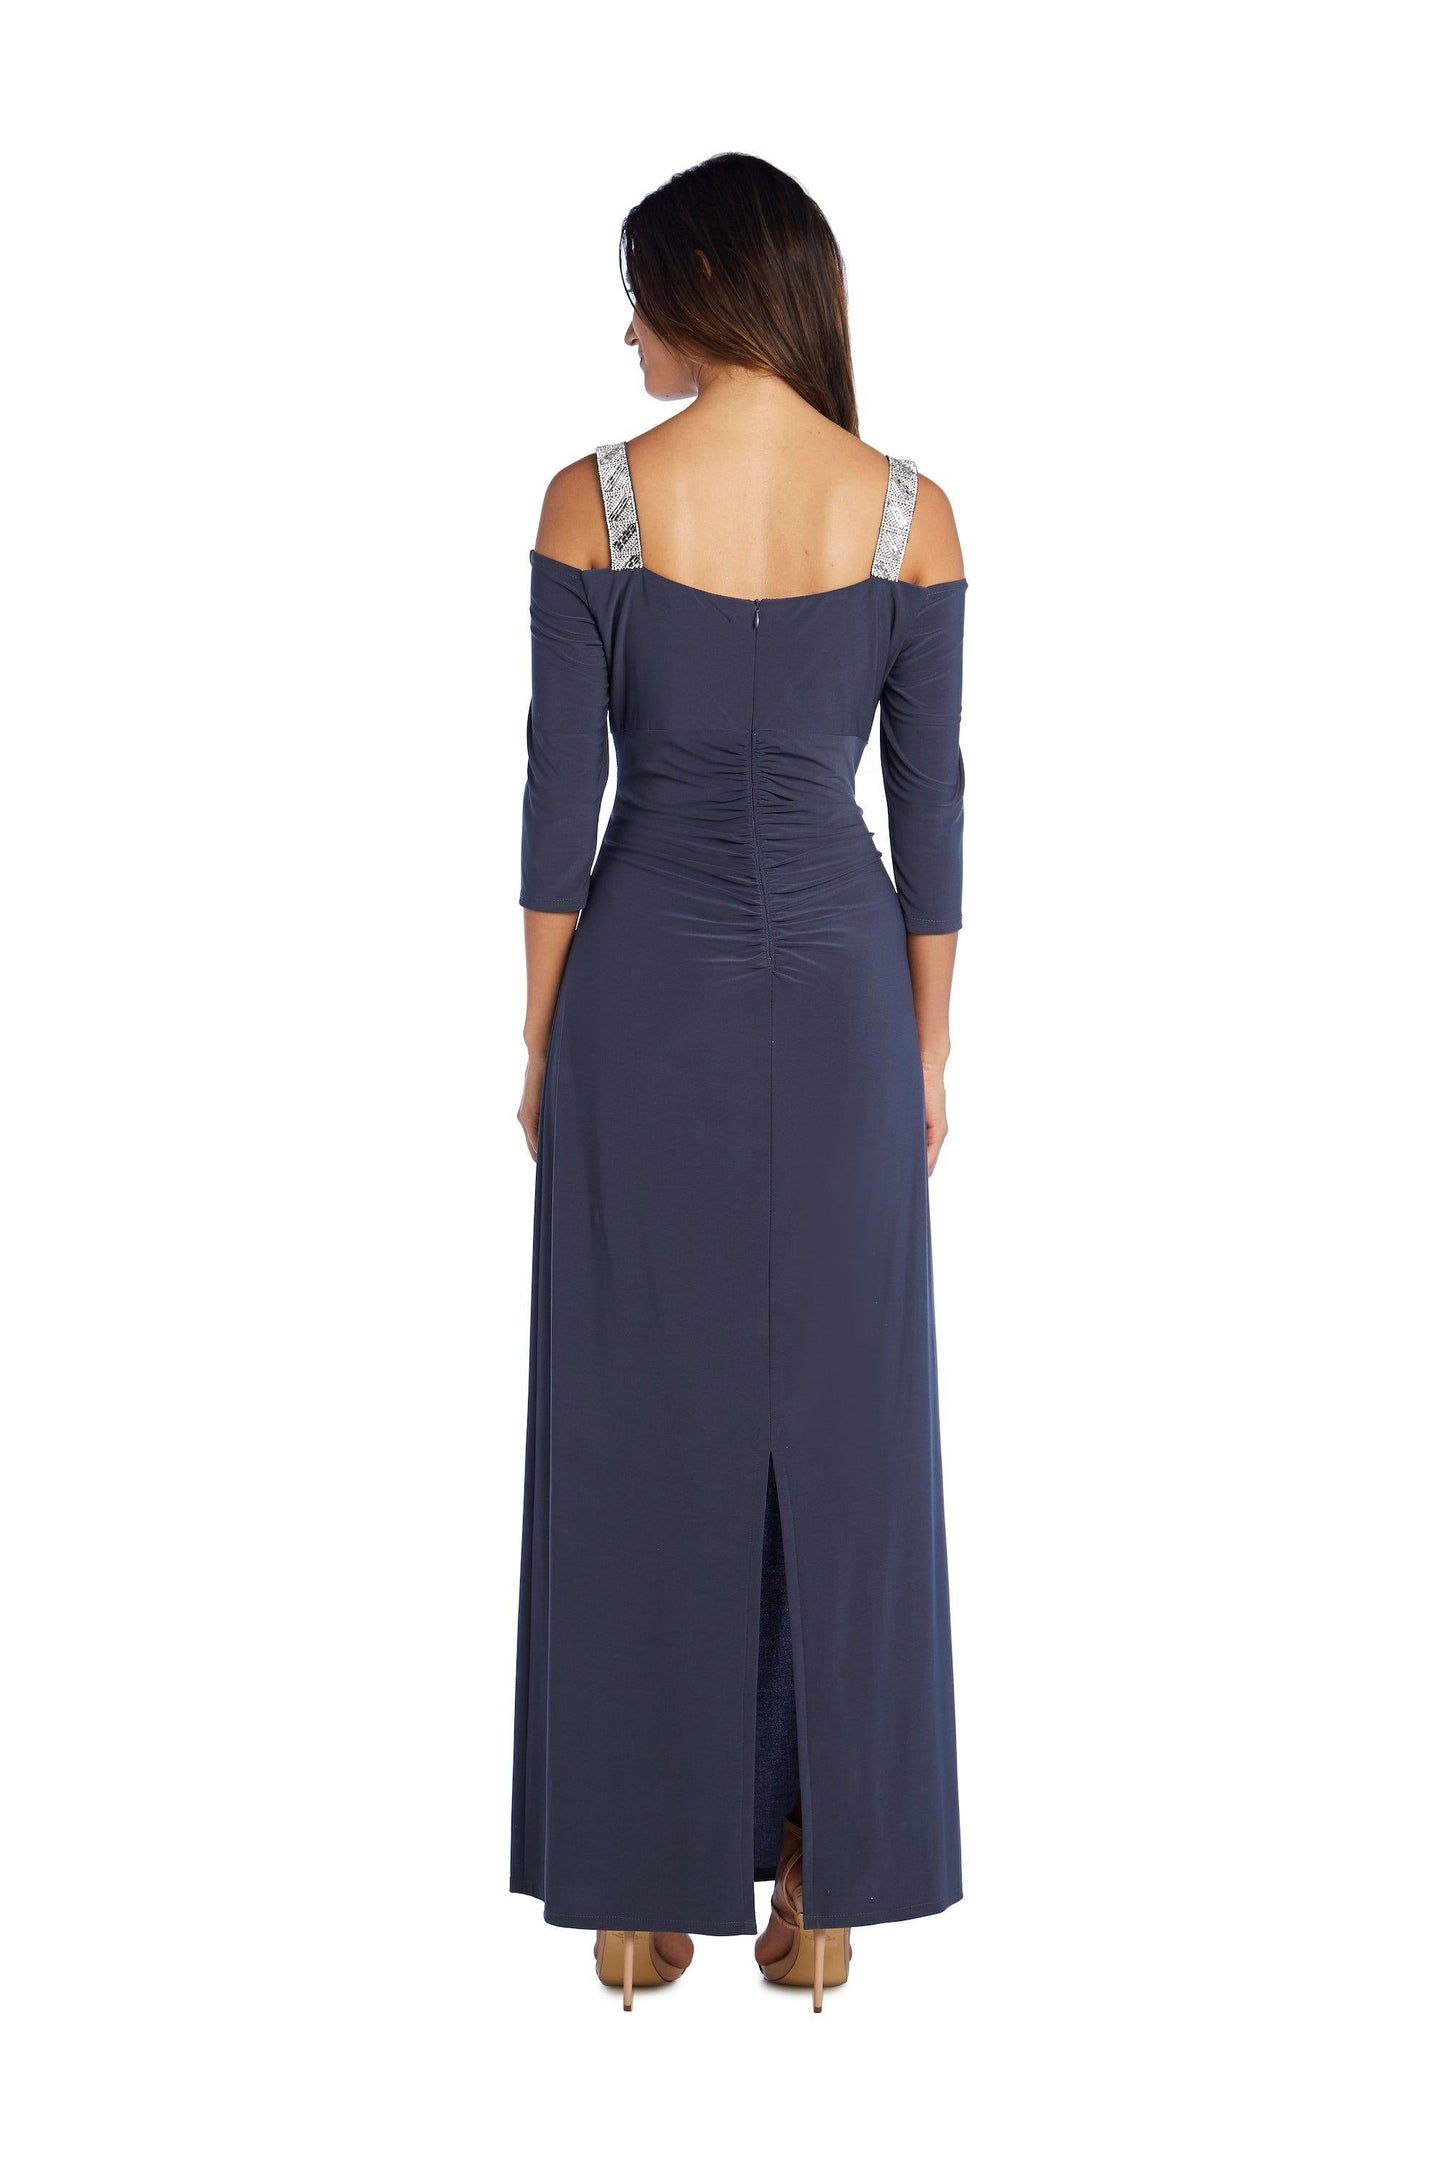 Long Formal Mother of the Bride Dress Sale - The Dress Outlet